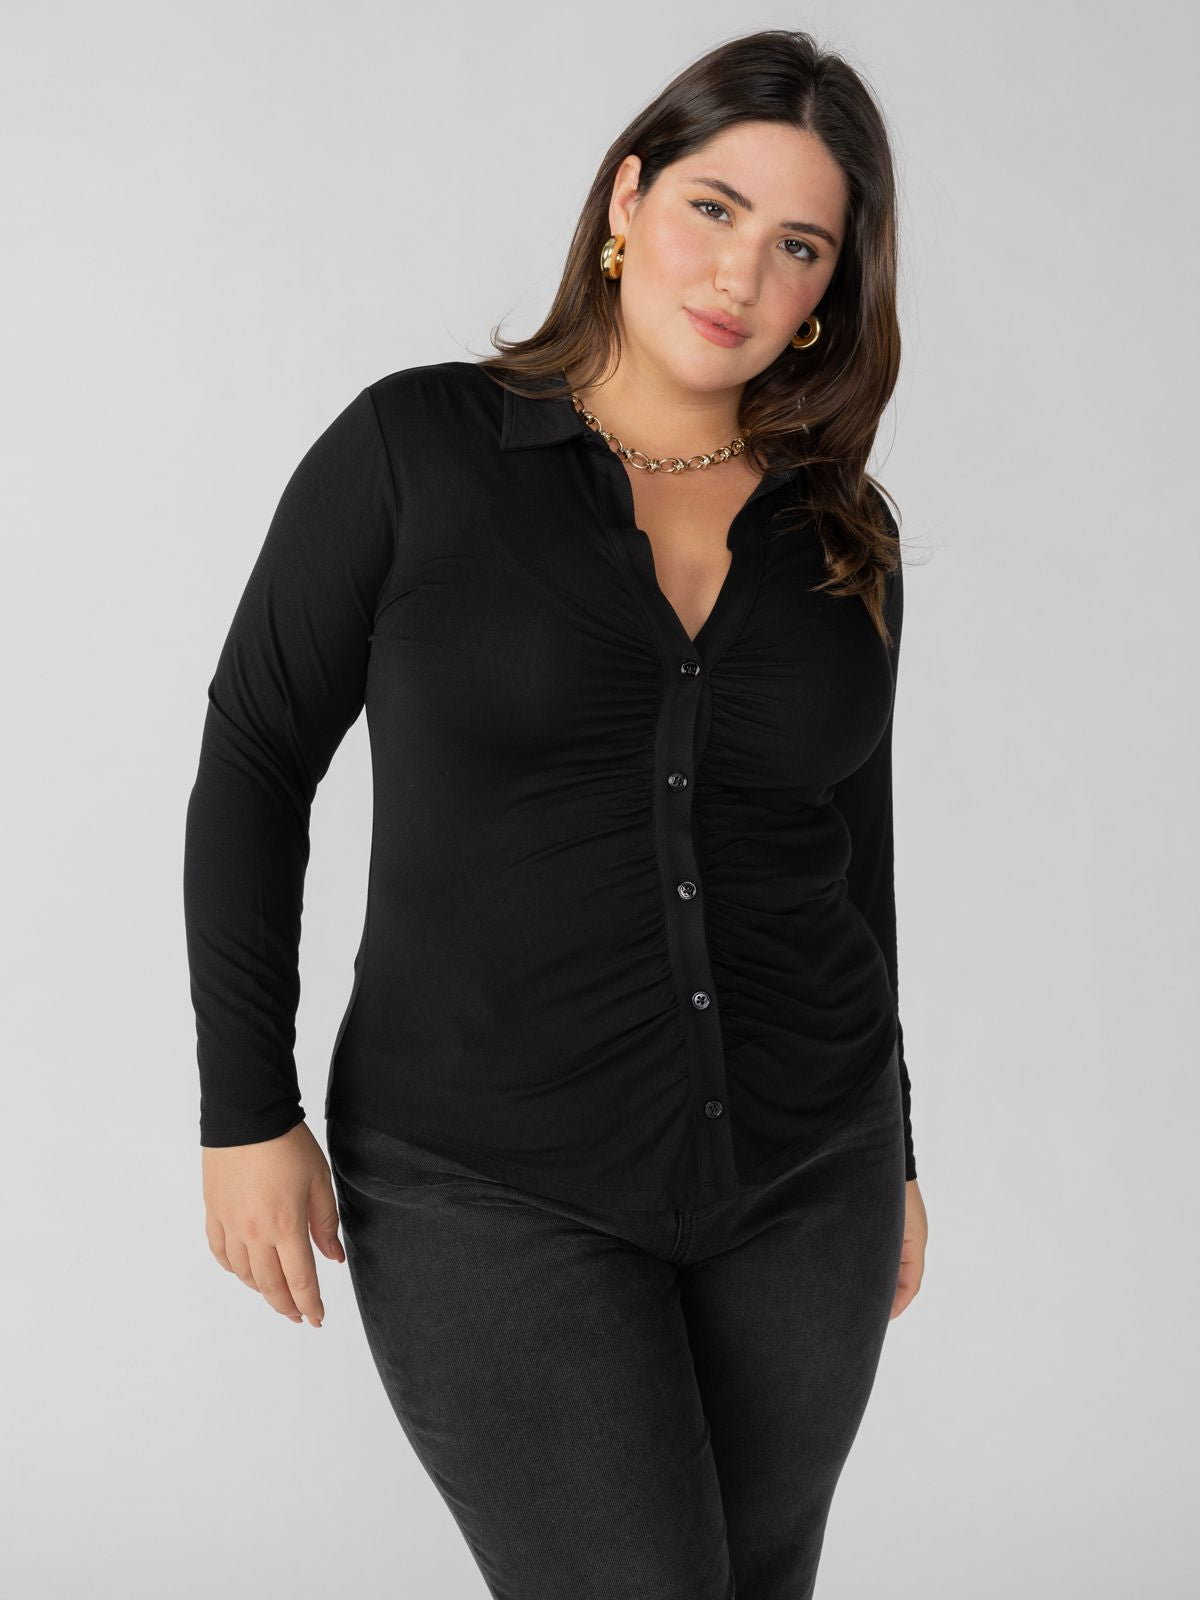 Dreamgirl Button Up Top Black Inclusive Collection